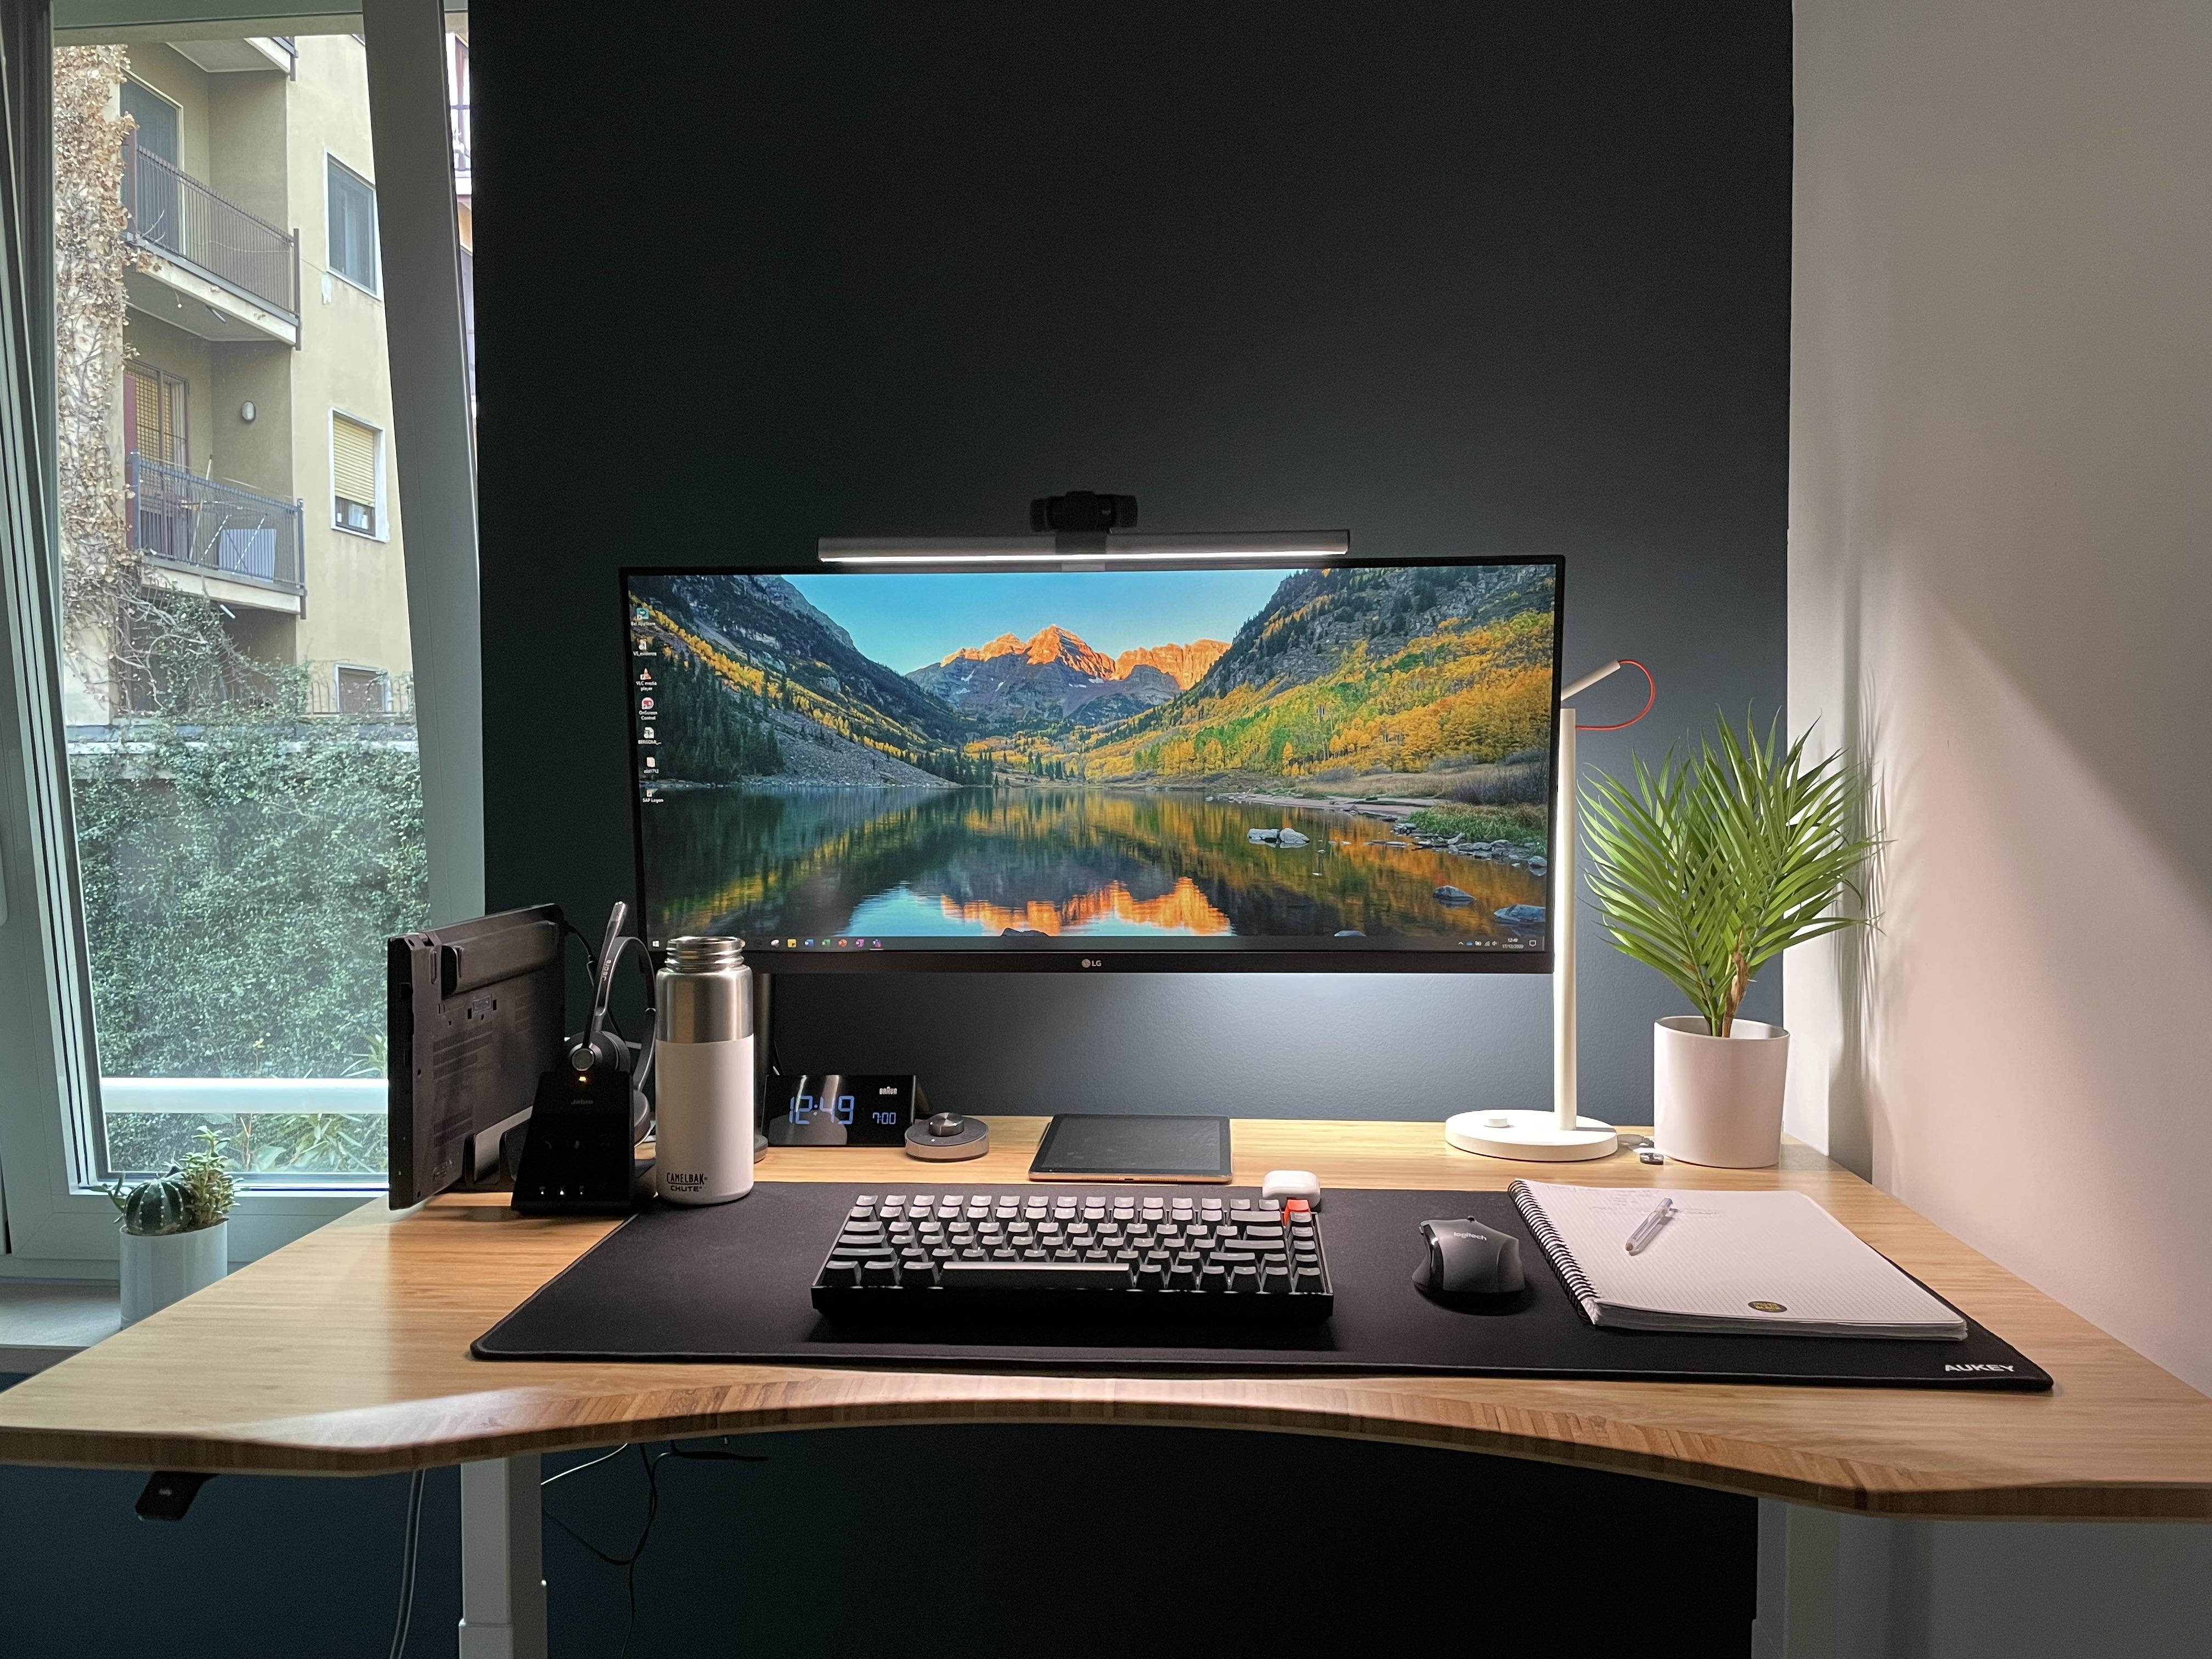 Maximize Your Workspace Lighting on a Budget: Why a Xiaomi Monitor Lamp Is the Best Home Office Upgrade This Year